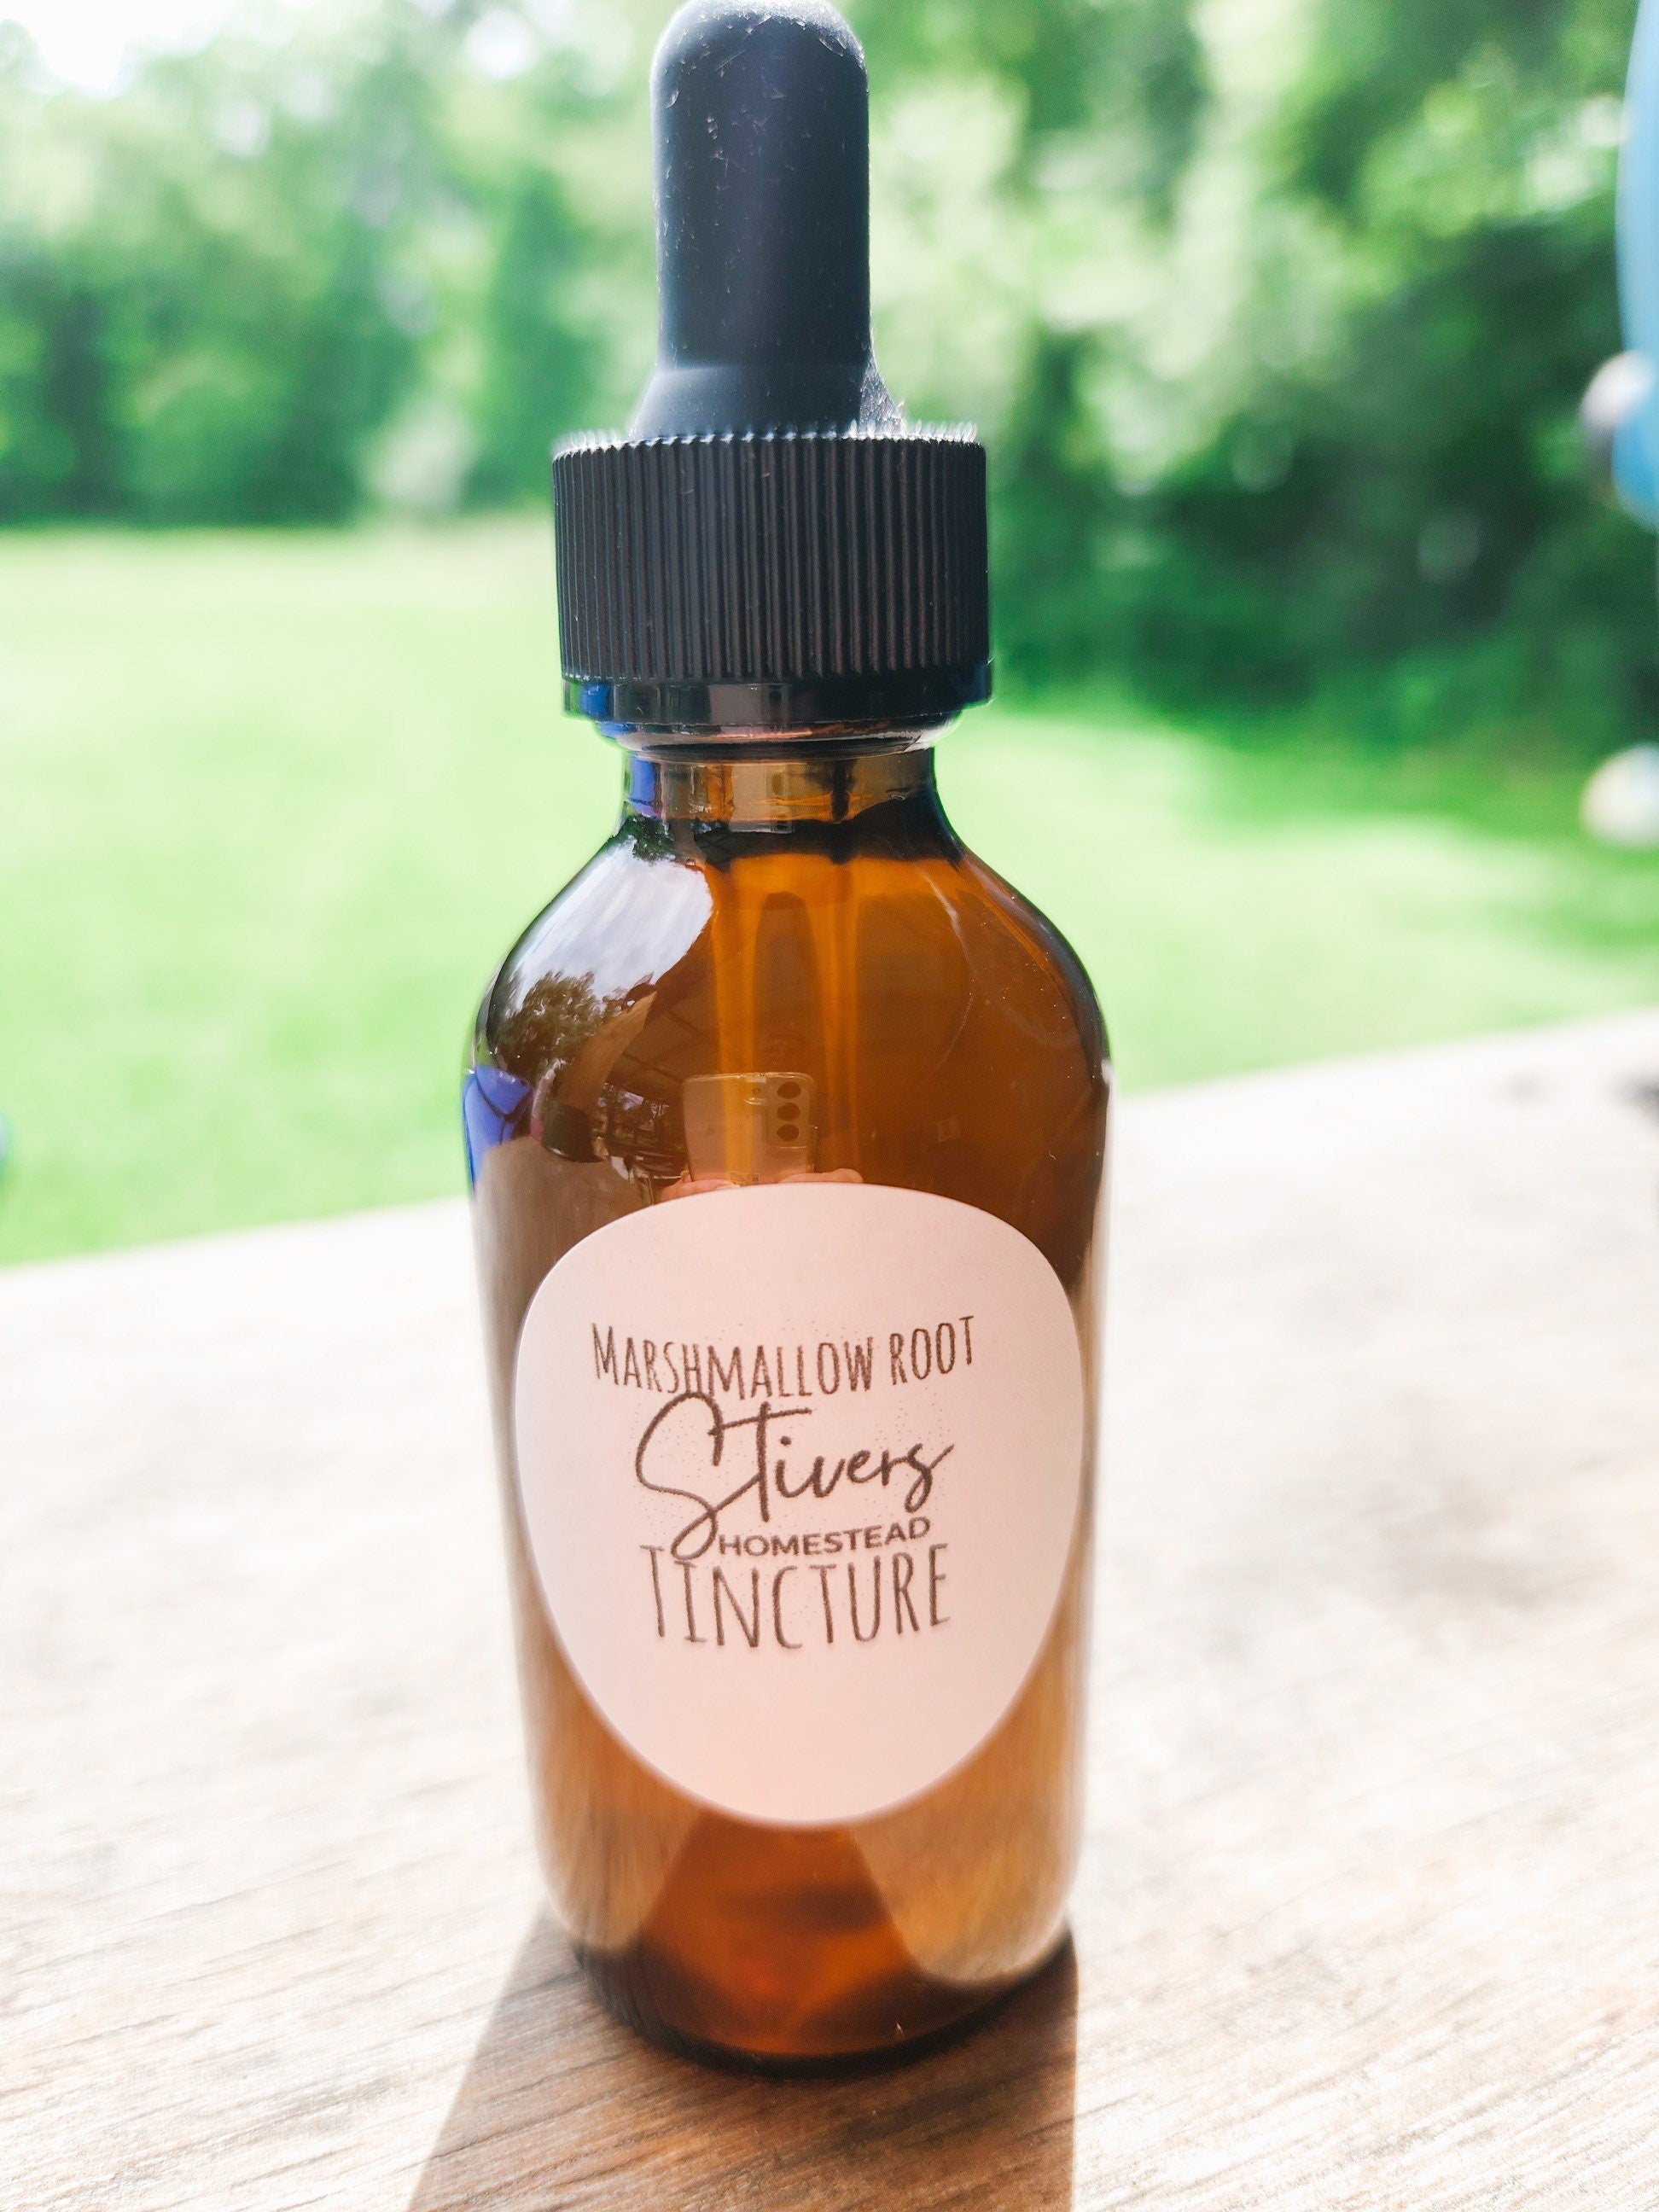 Marshmallow Root Tincture (Digestive and Respiratory)